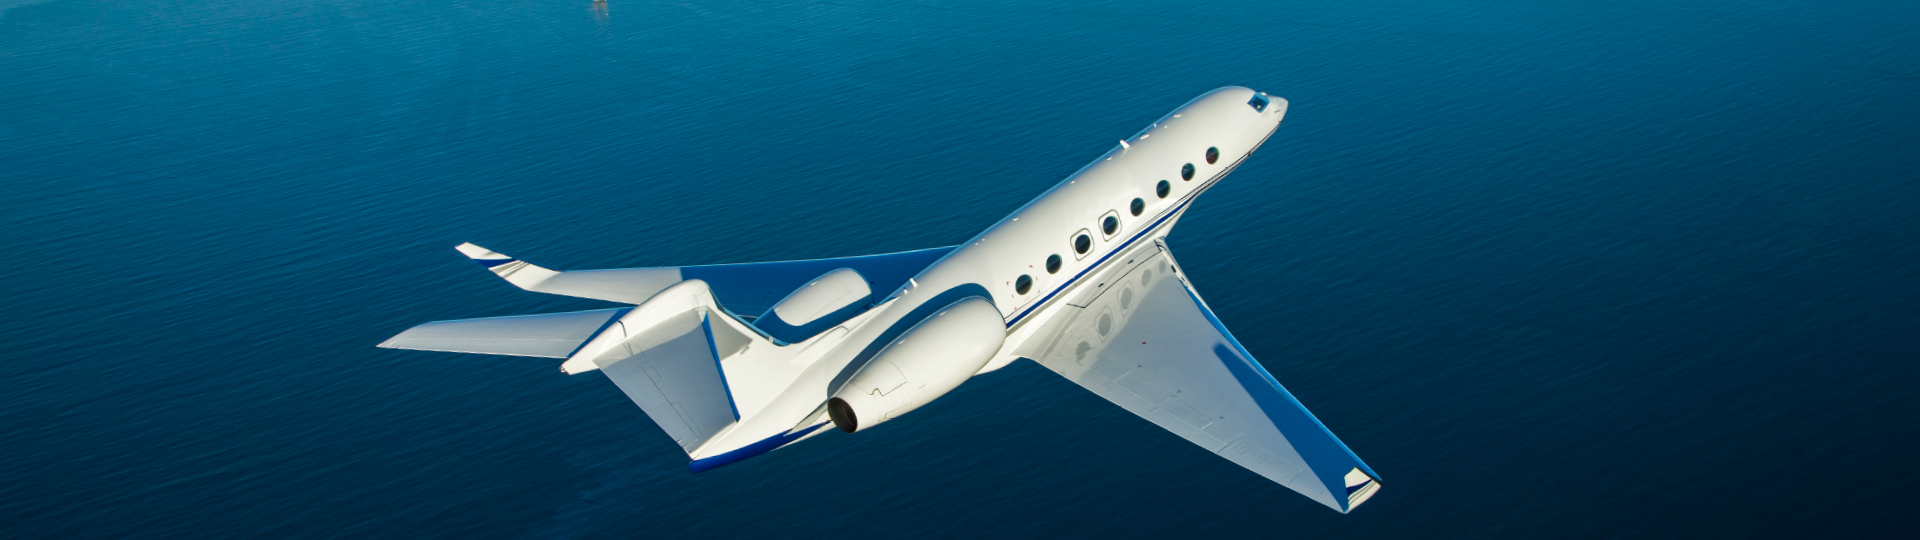 Gulfstream 450 private jet with winglets flying over the Pacific Ocean